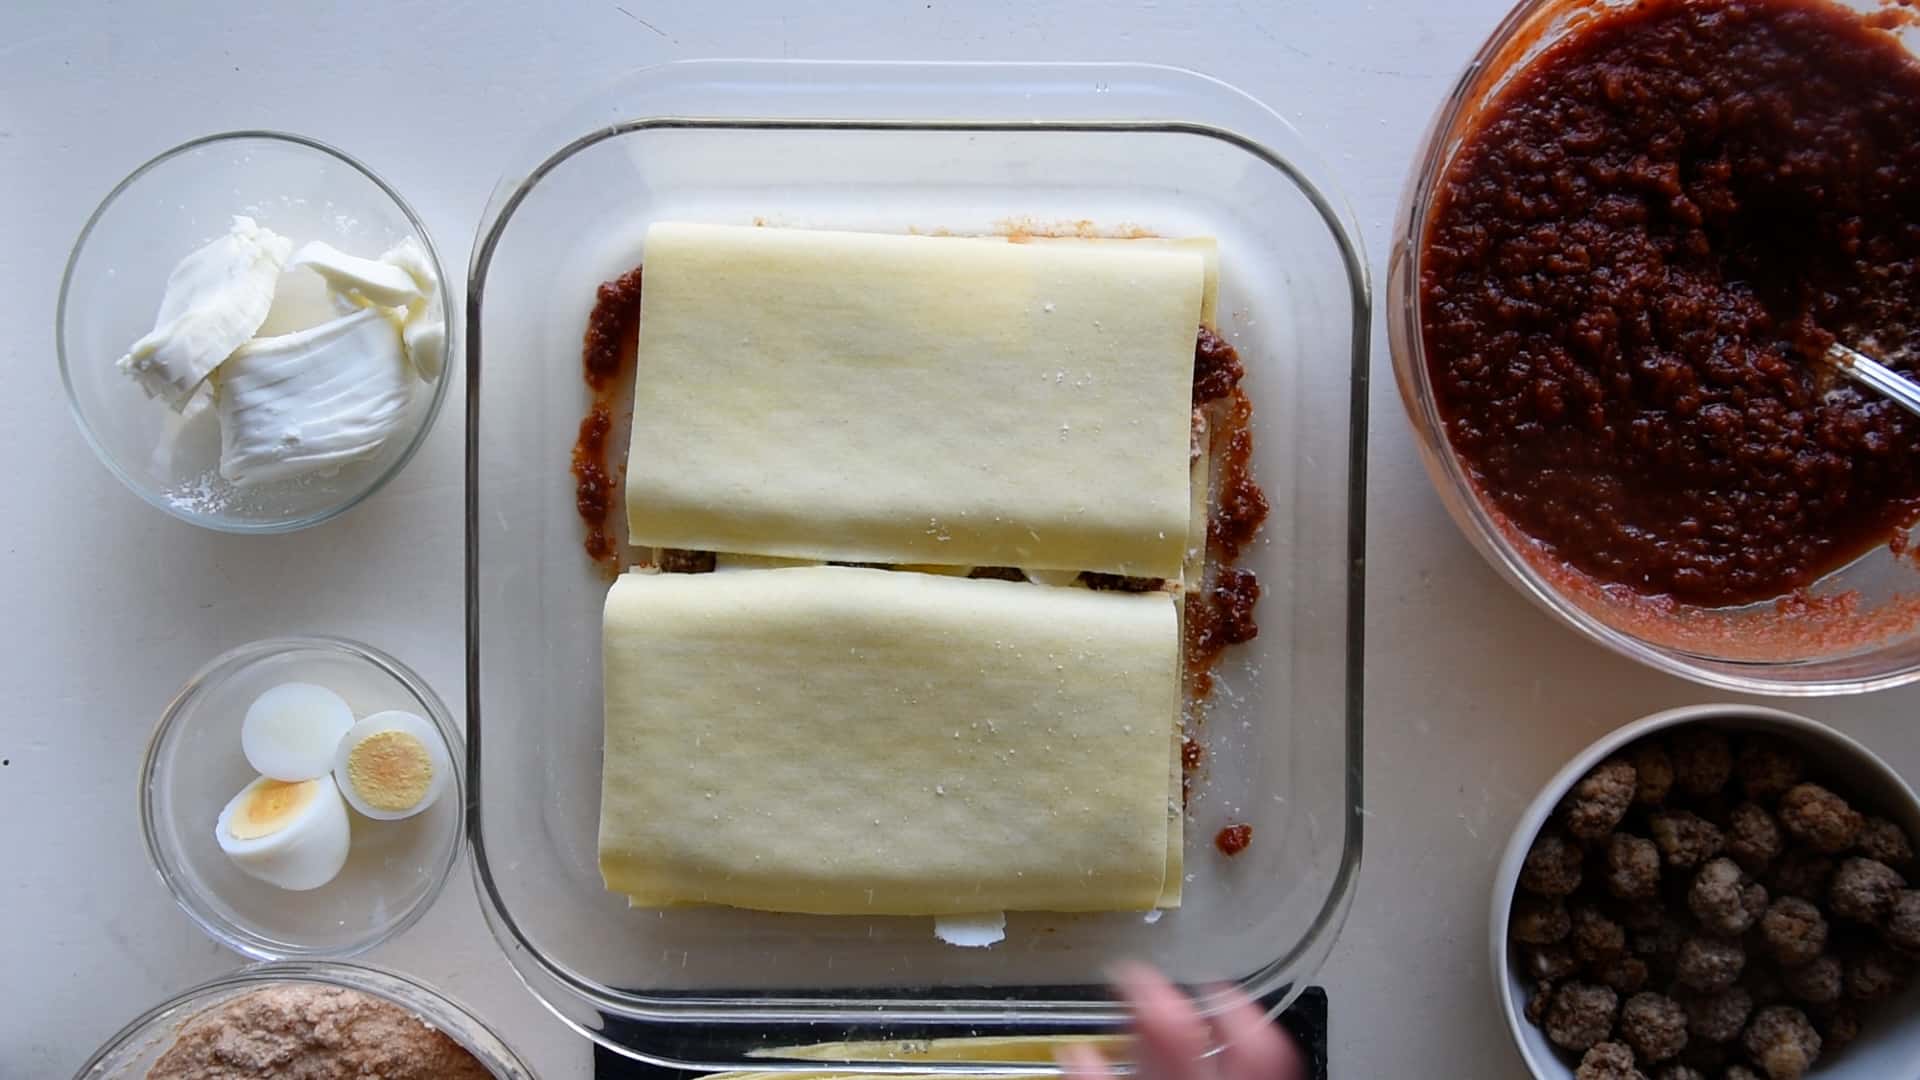 Cover with the next layer of lasagna sheets